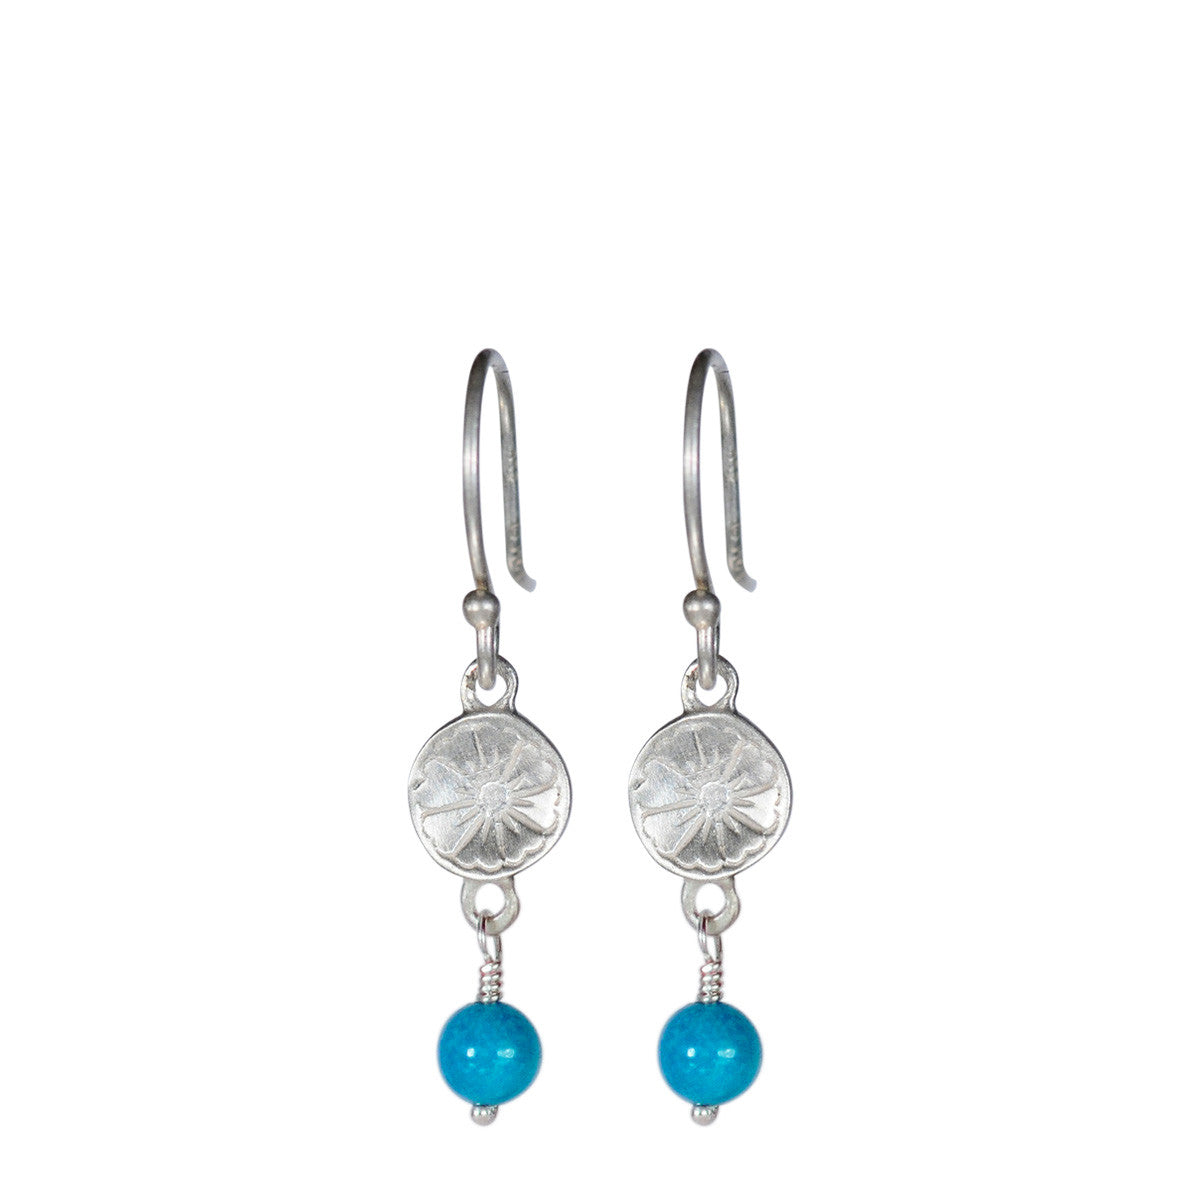 Sterling Silver Small Engraved Flower Earrings with Turquoise Bead